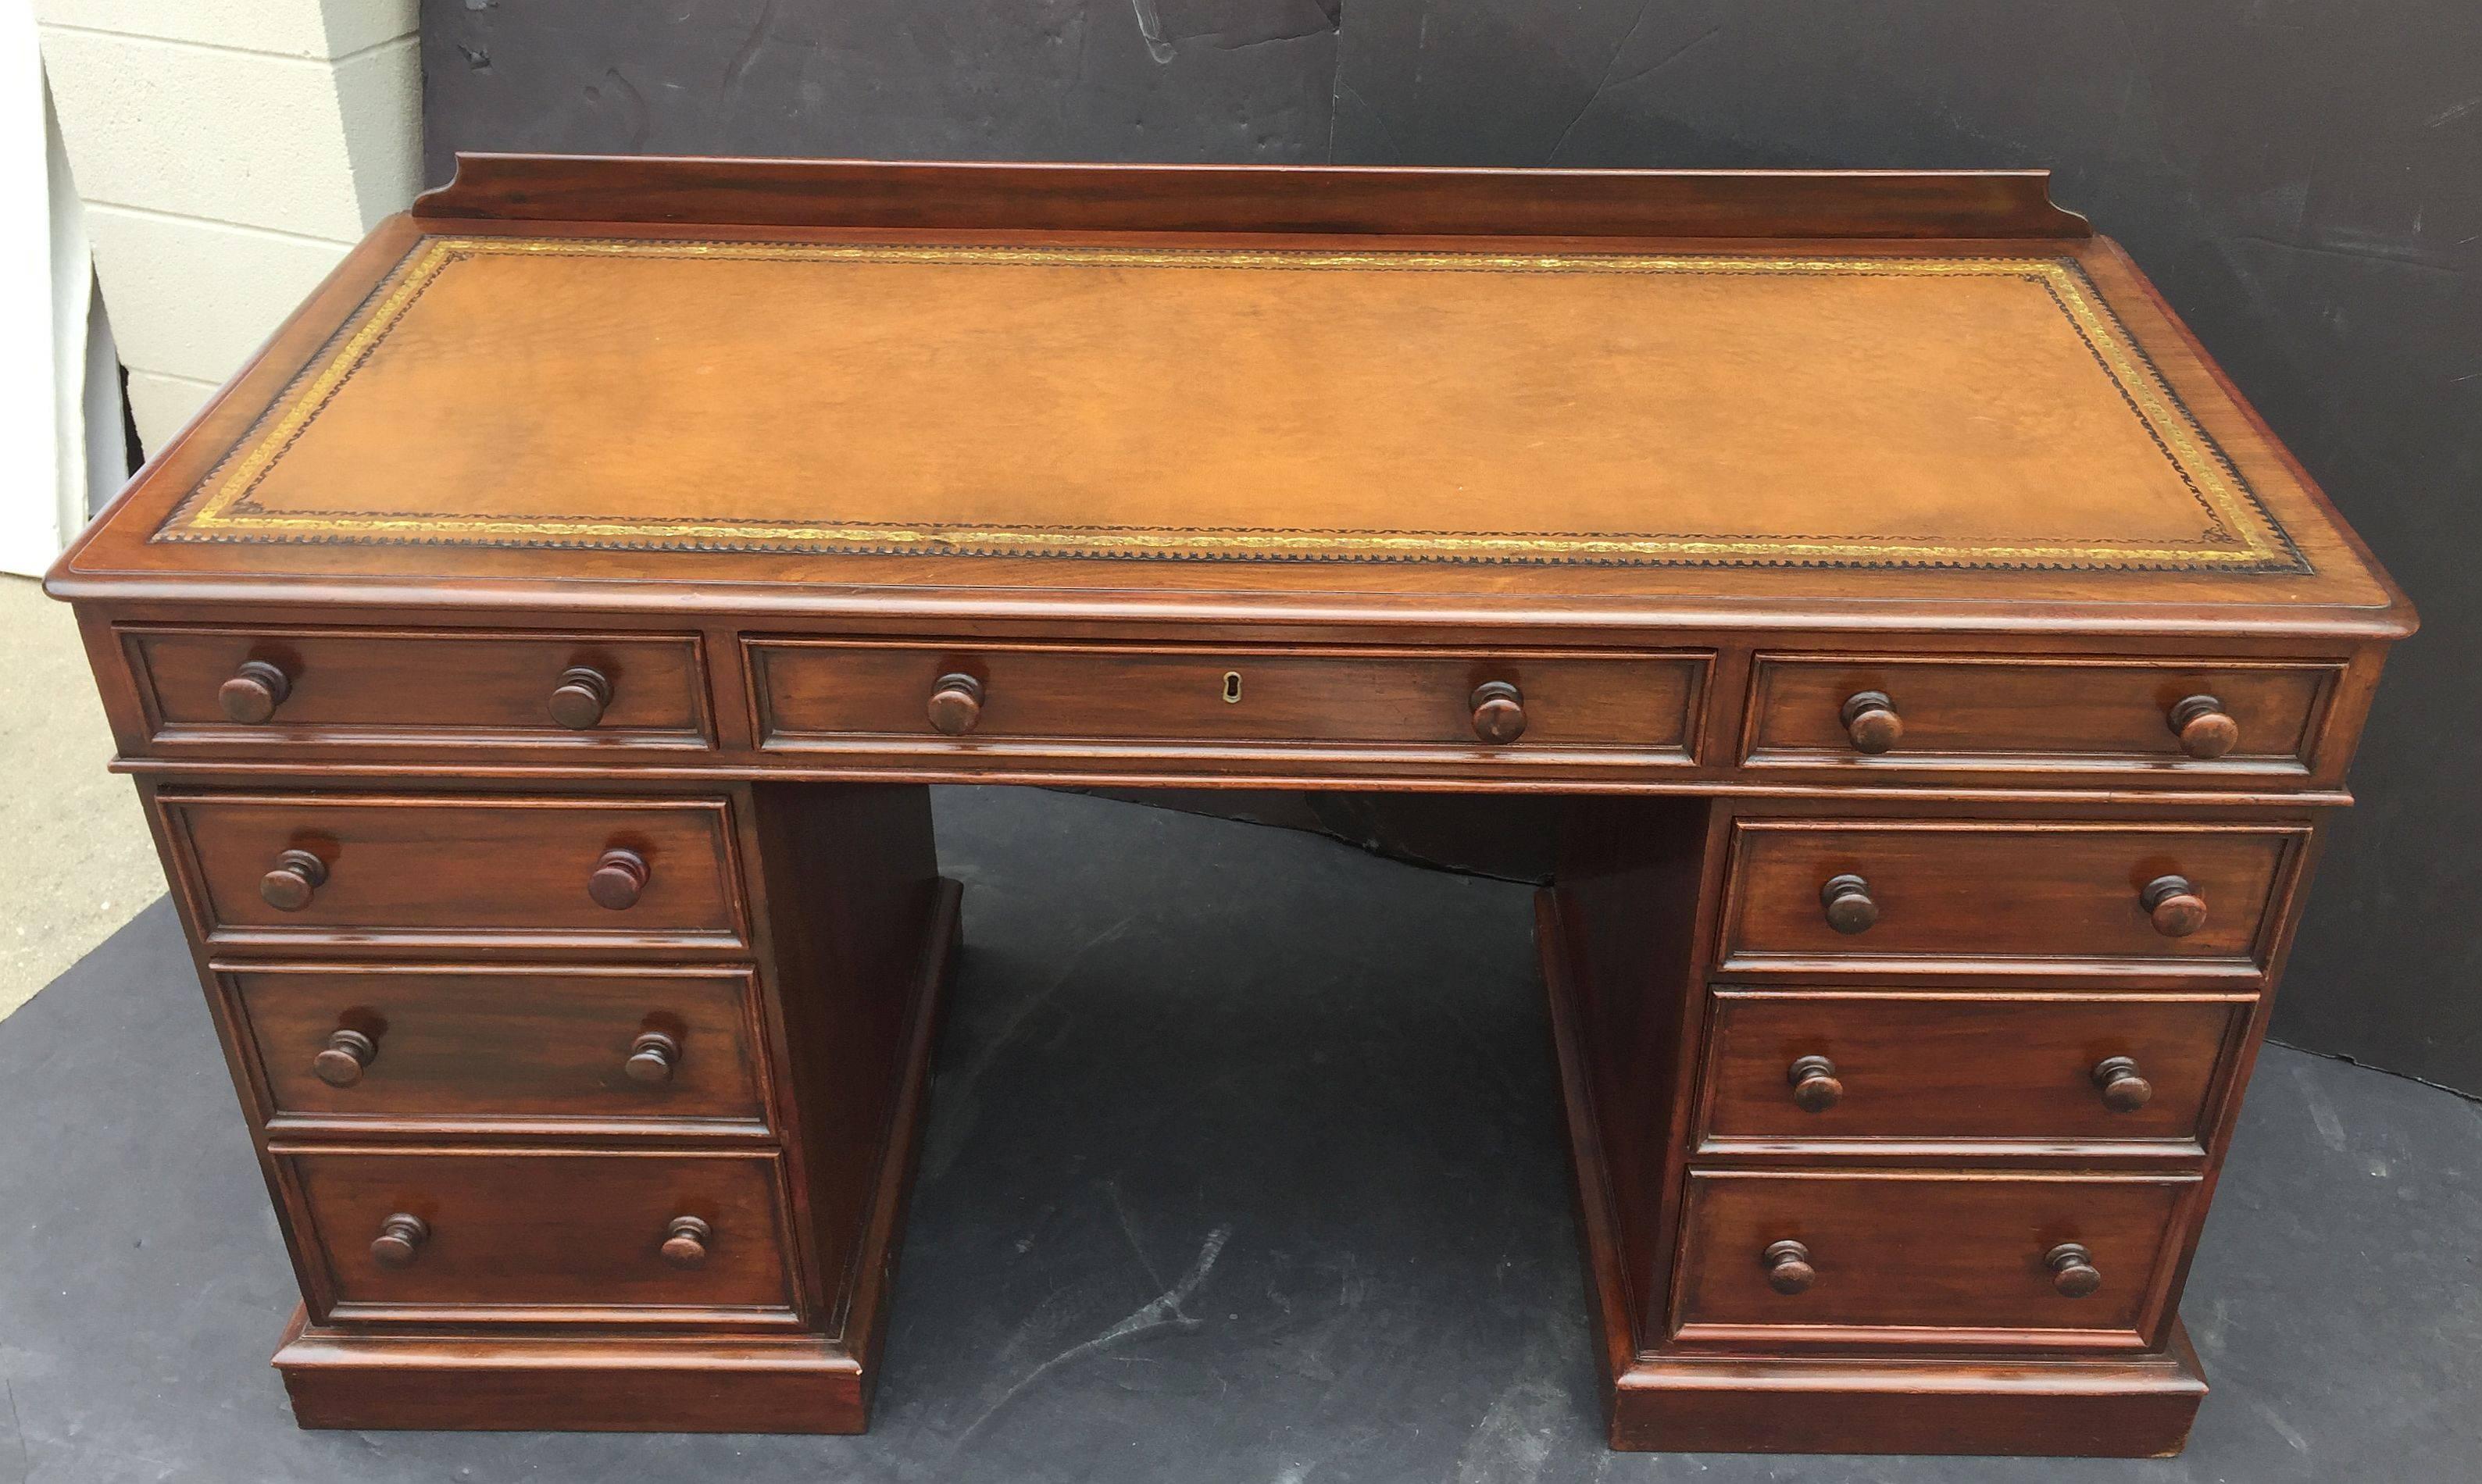 Brass English Pedestal Desk of Mahogany with Embossed Leather Top